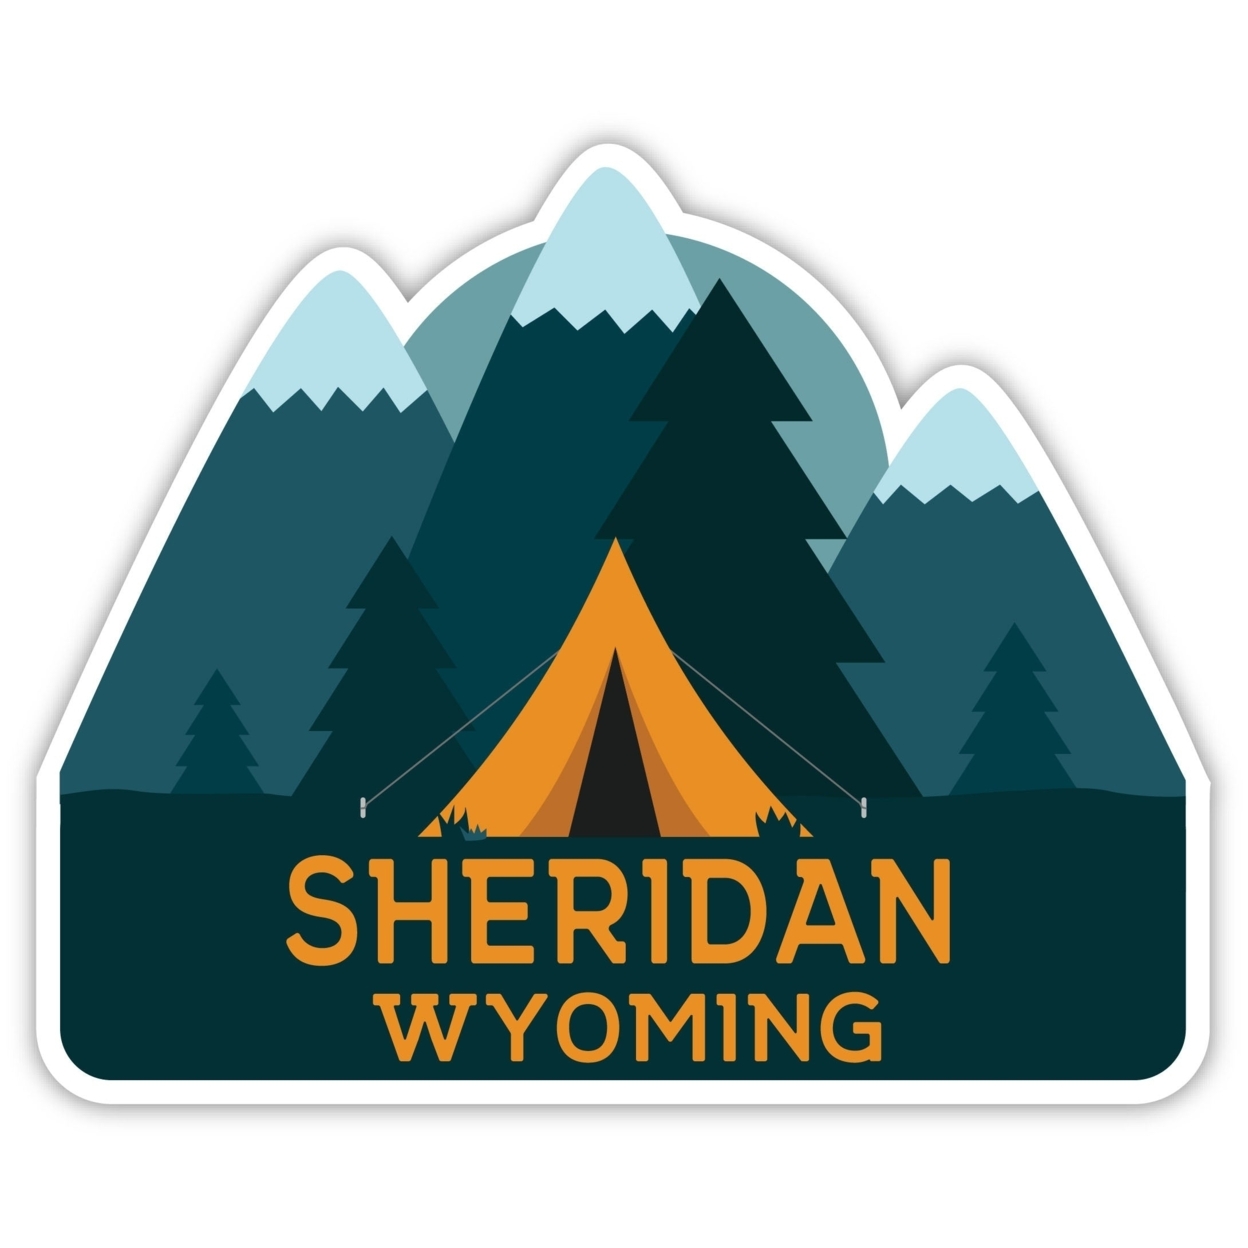 Sheridan Wyoming Souvenir Decorative Stickers (Choose Theme And Size) - Single Unit, 4-Inch, Adventures Awaits